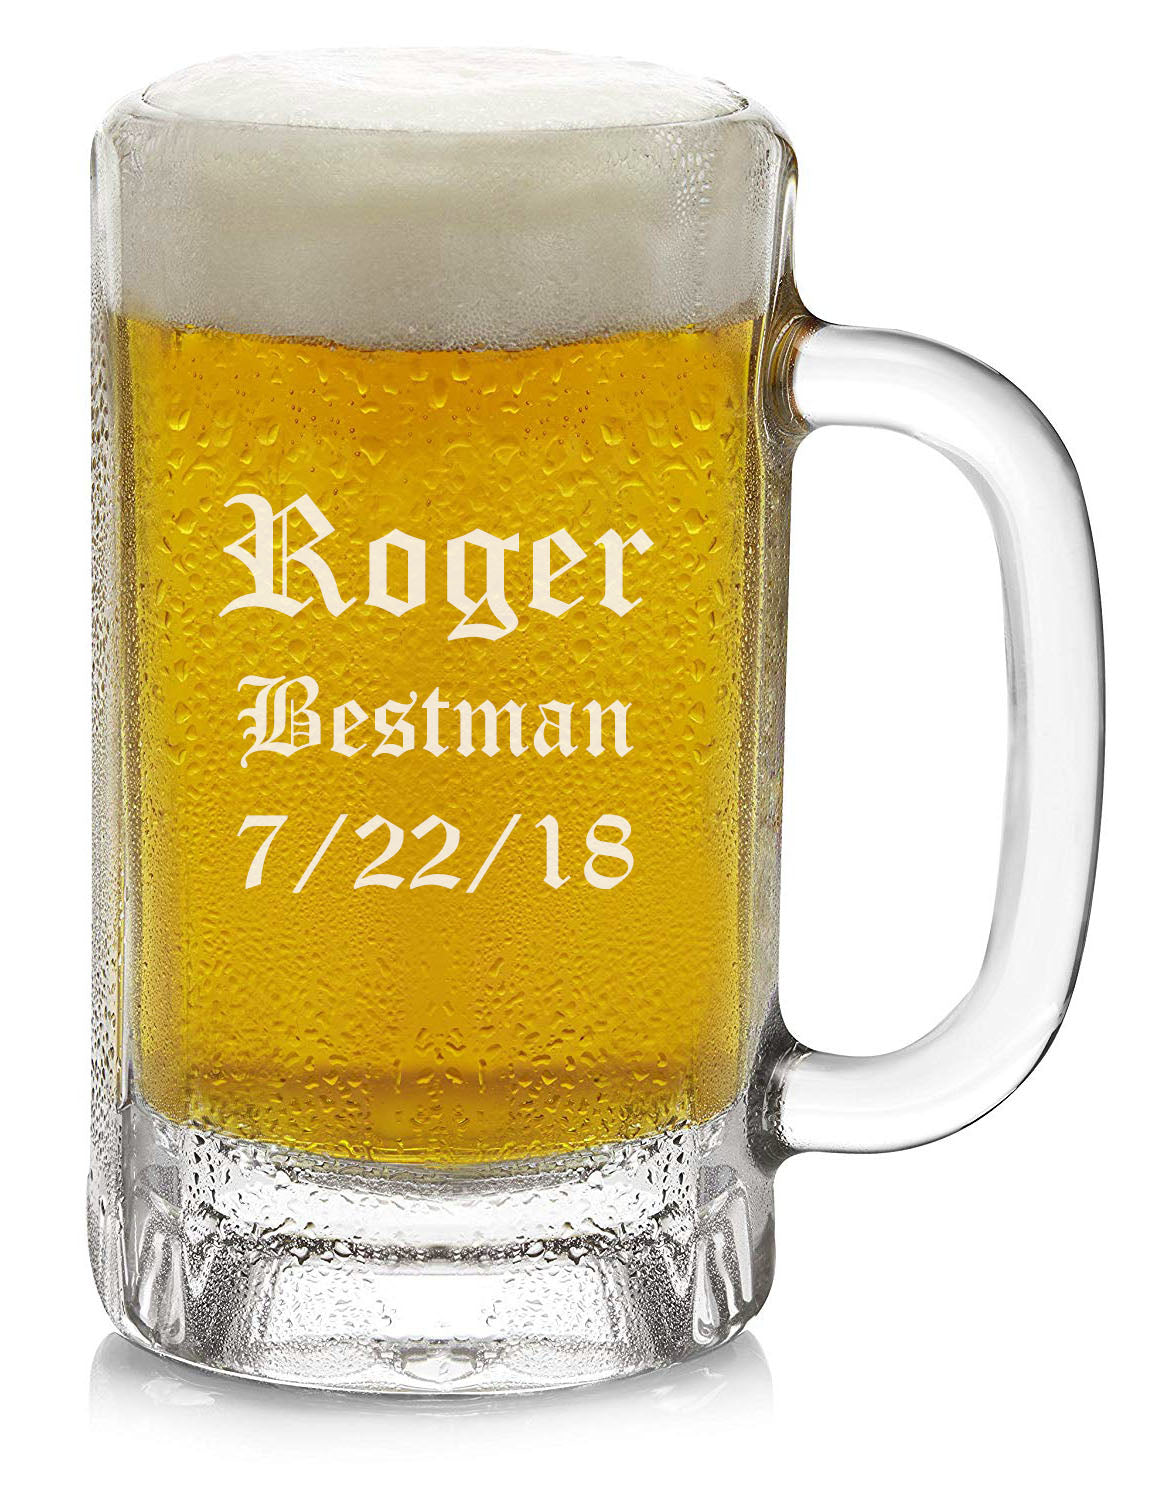 Giant Beer Mug Personalized Beer Stein 16 Ounces